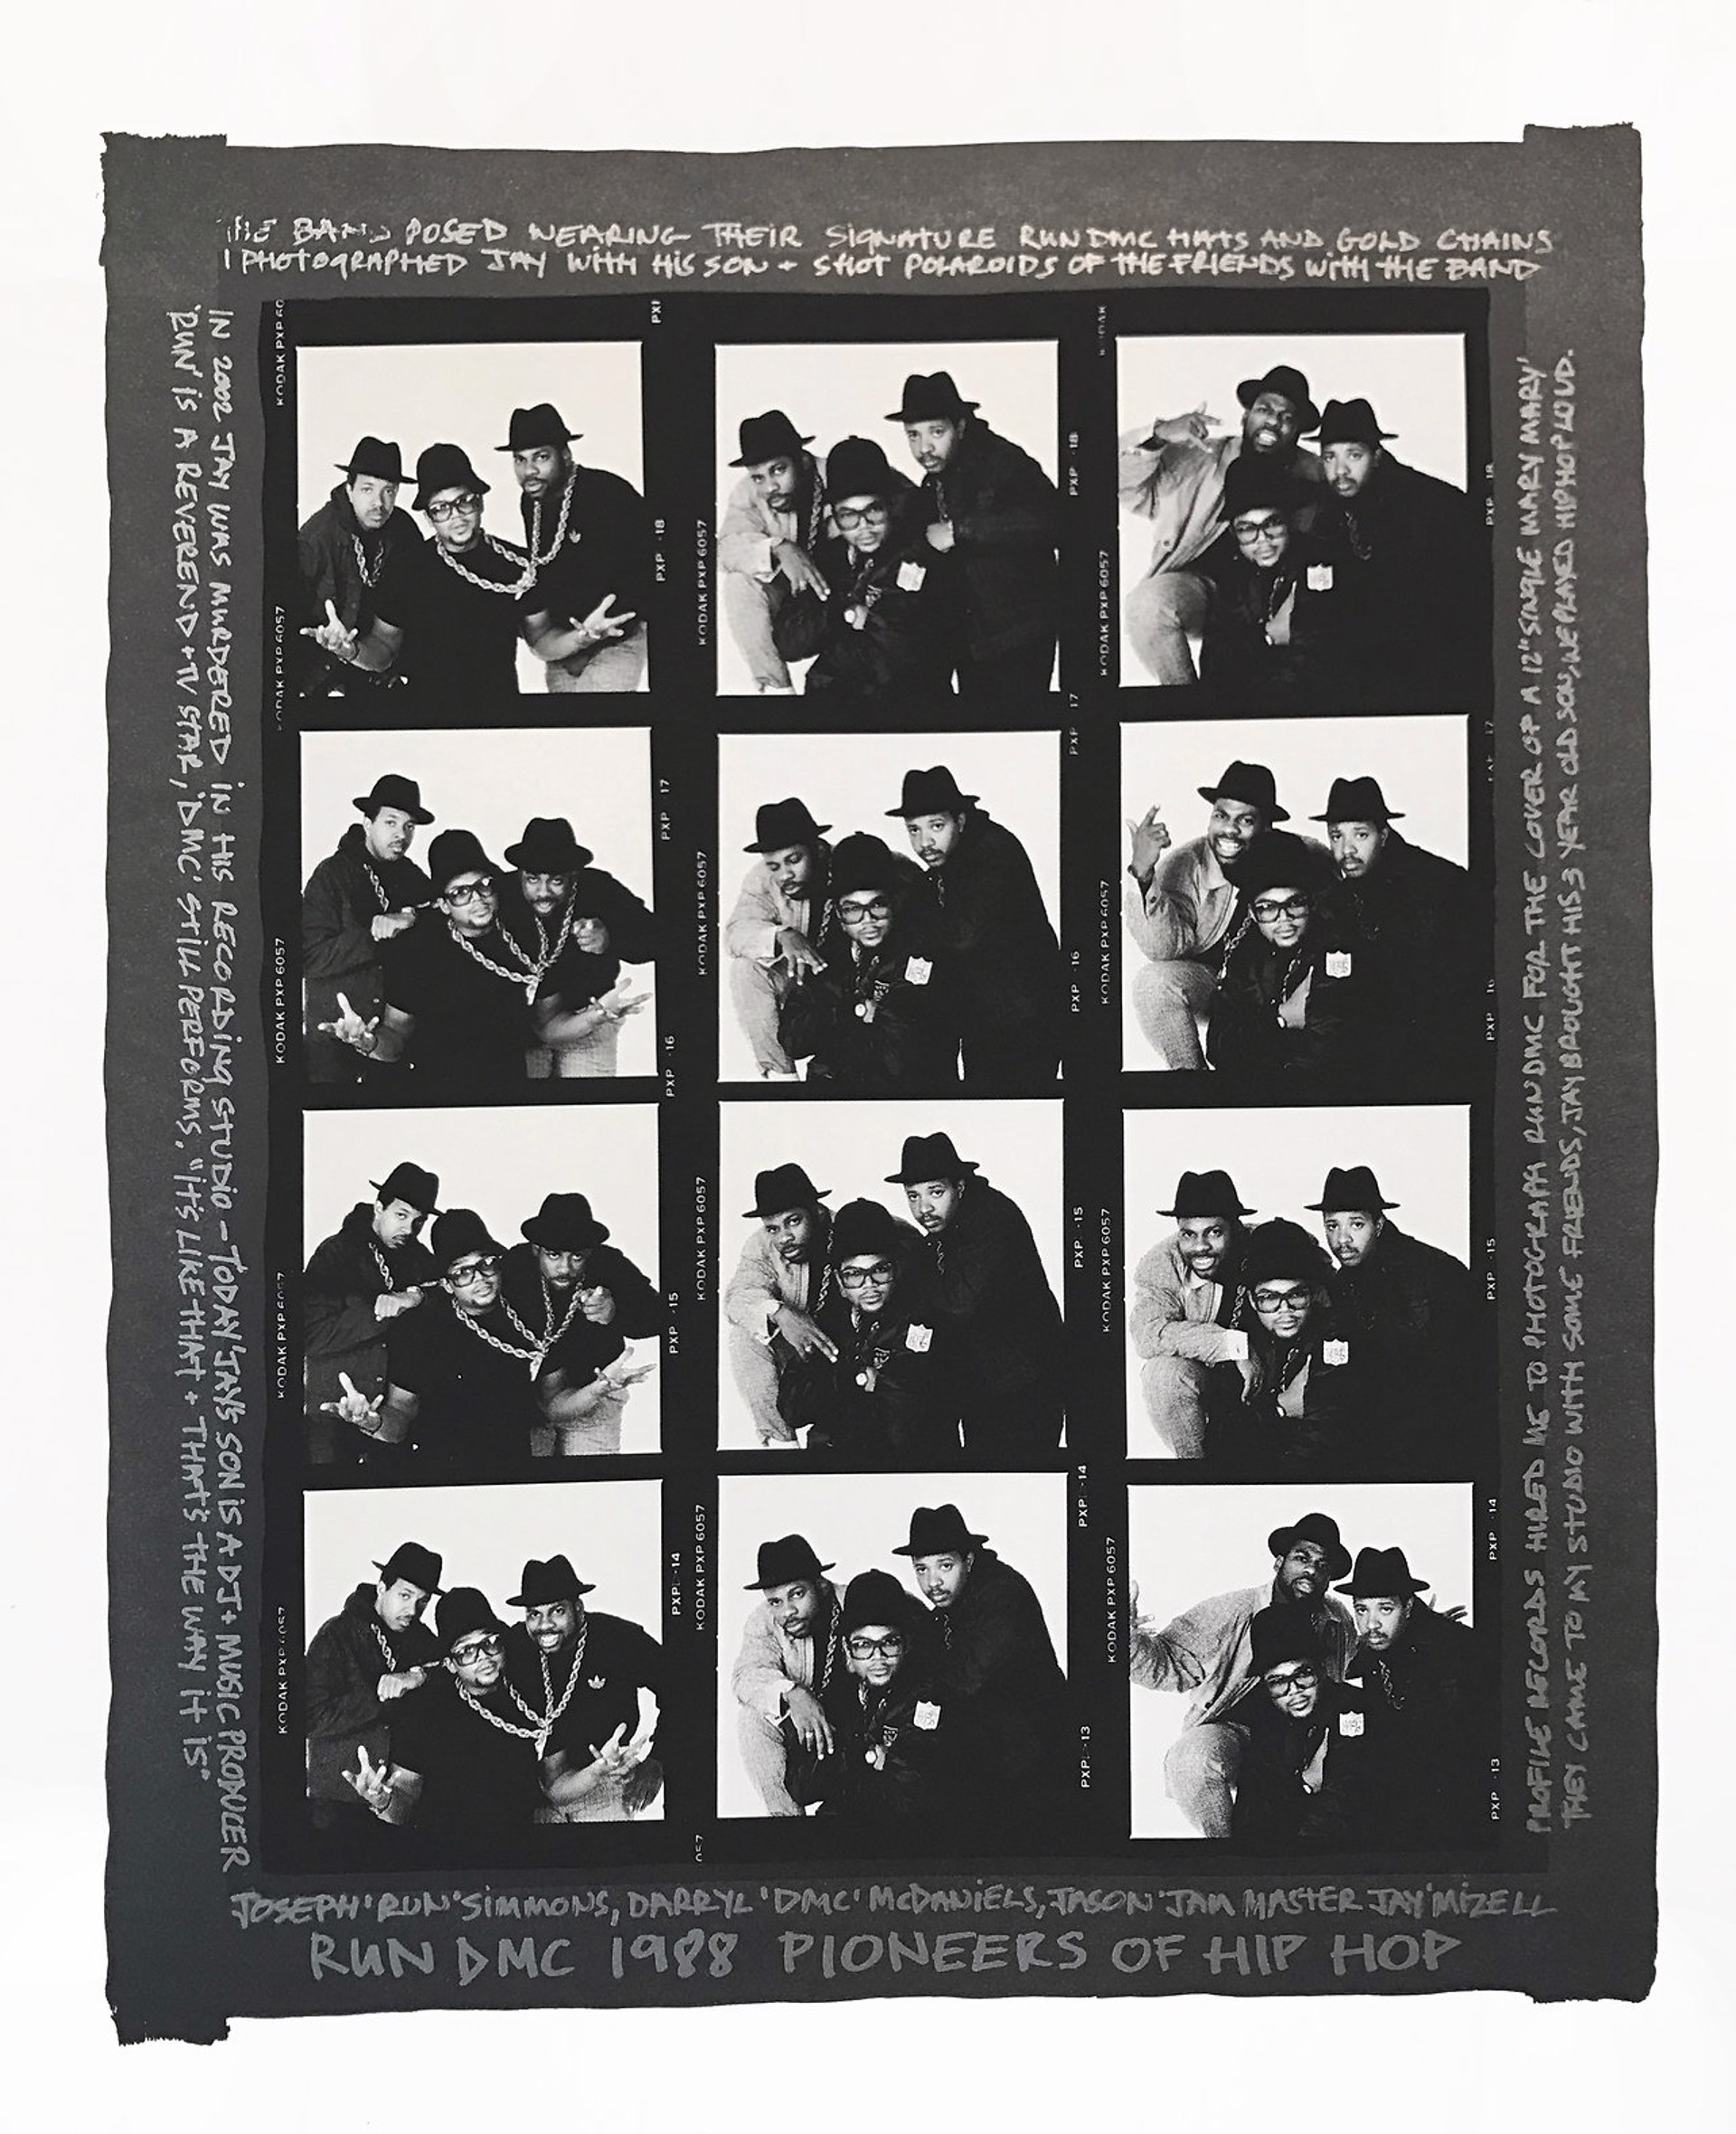 RUN DMC 1988 PIONEERS OF HIP HOP Contact Sheet (Graphite Border) by Janette Beckman